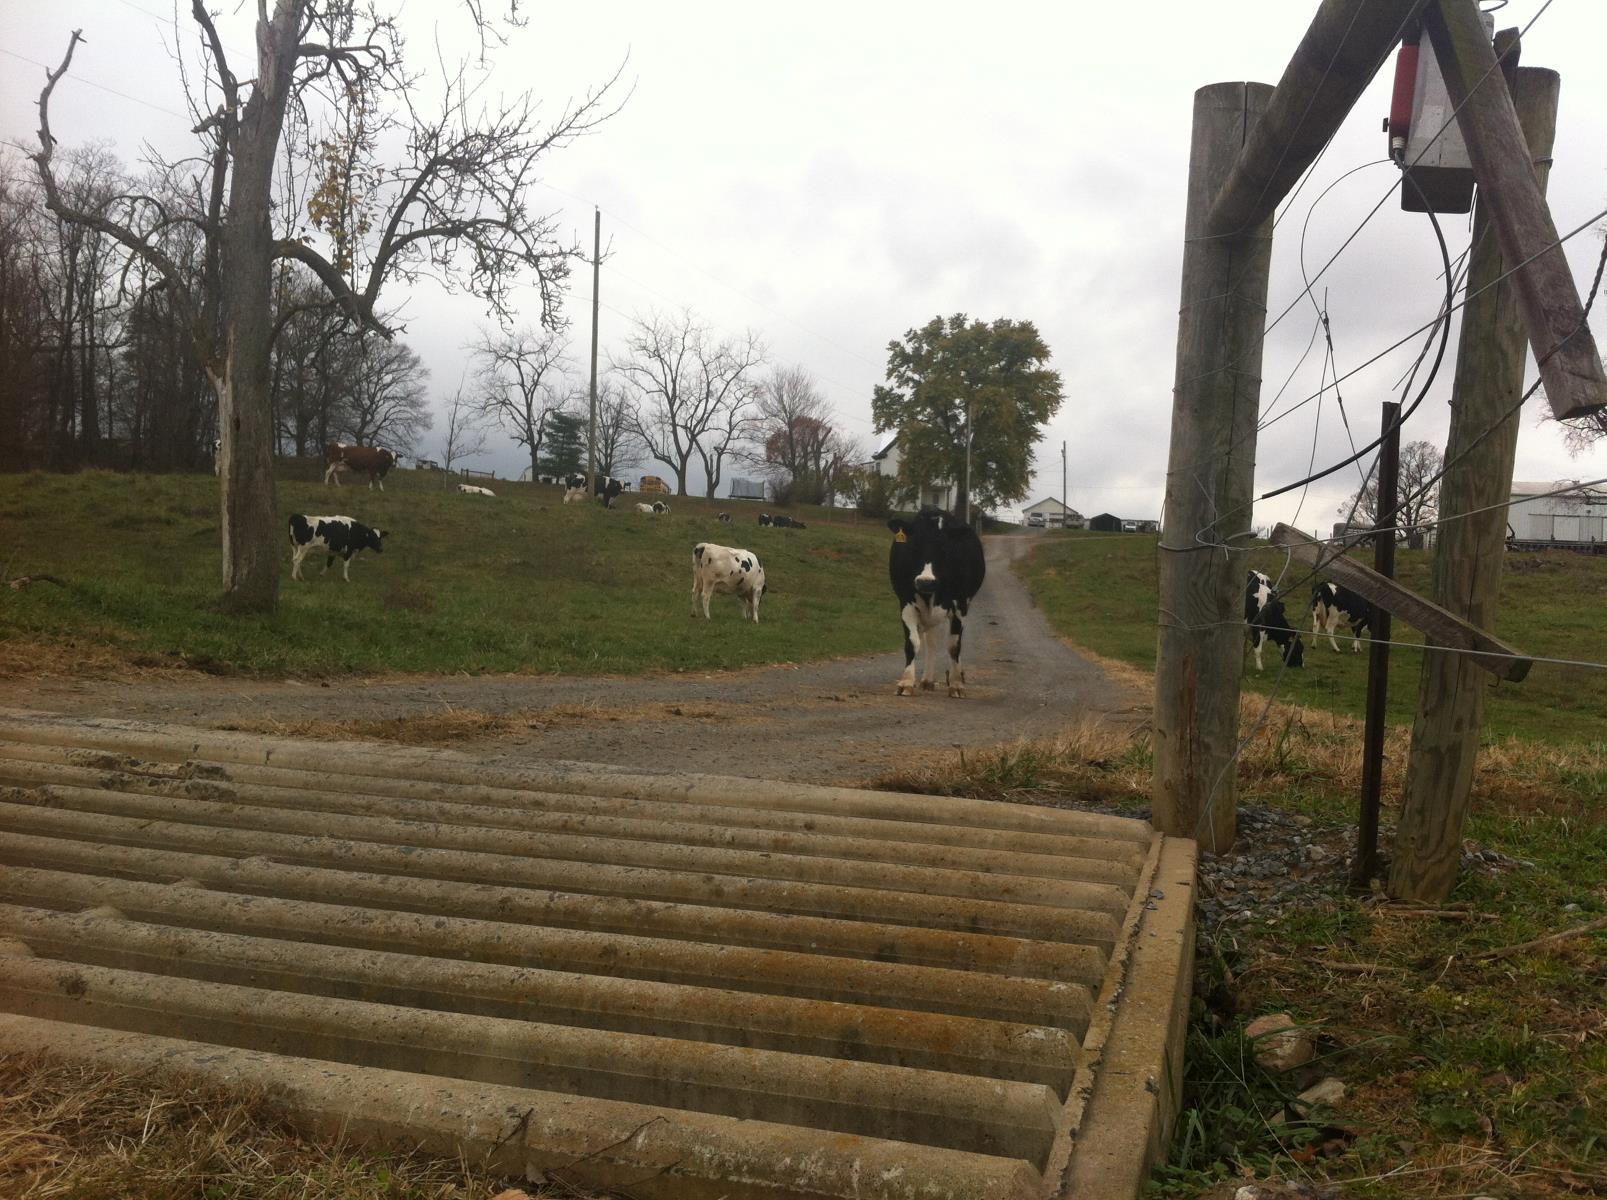 The Surprising Reason Cows Never Cross Cattle Guards